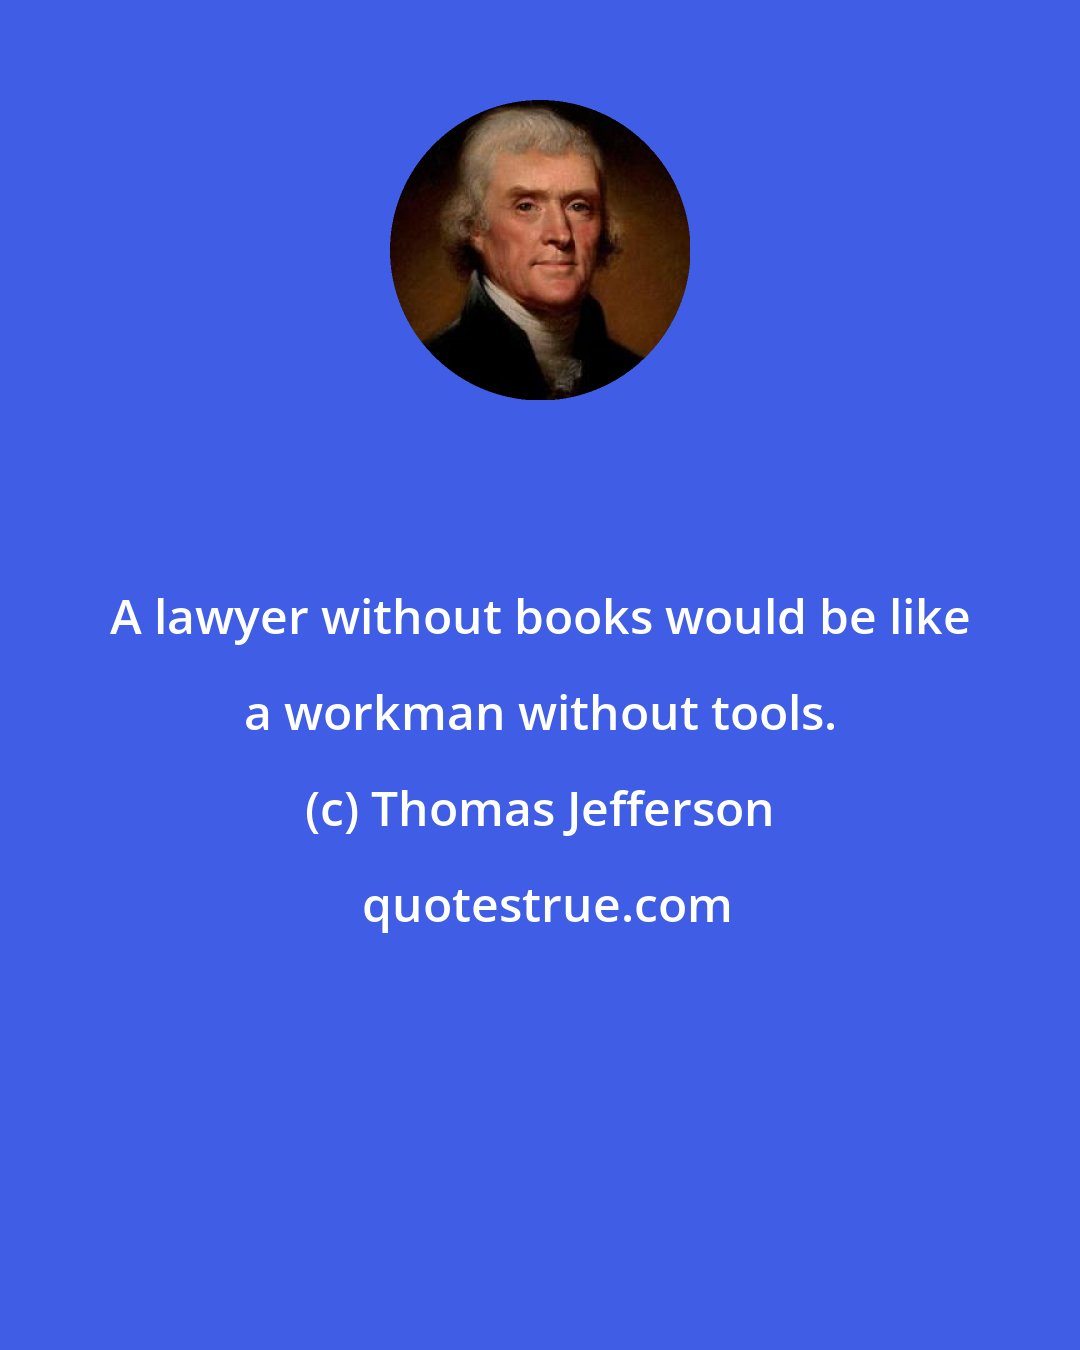 Thomas Jefferson: A lawyer without books would be like a workman without tools.